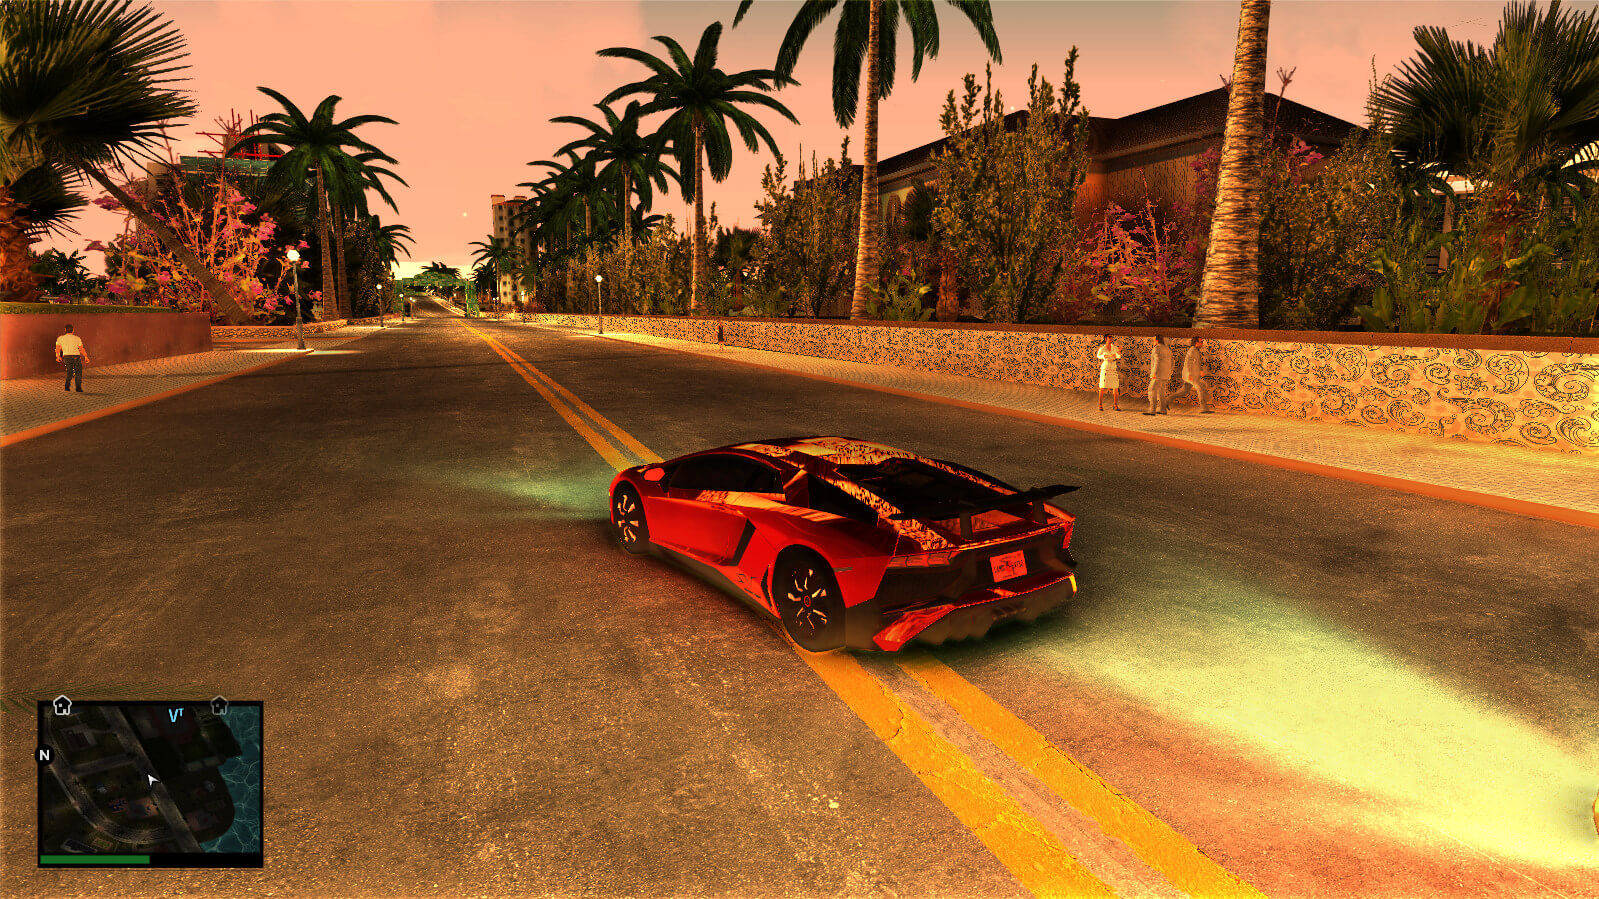 Gta vice city hd graphics download for pc download streaming videos from any website free